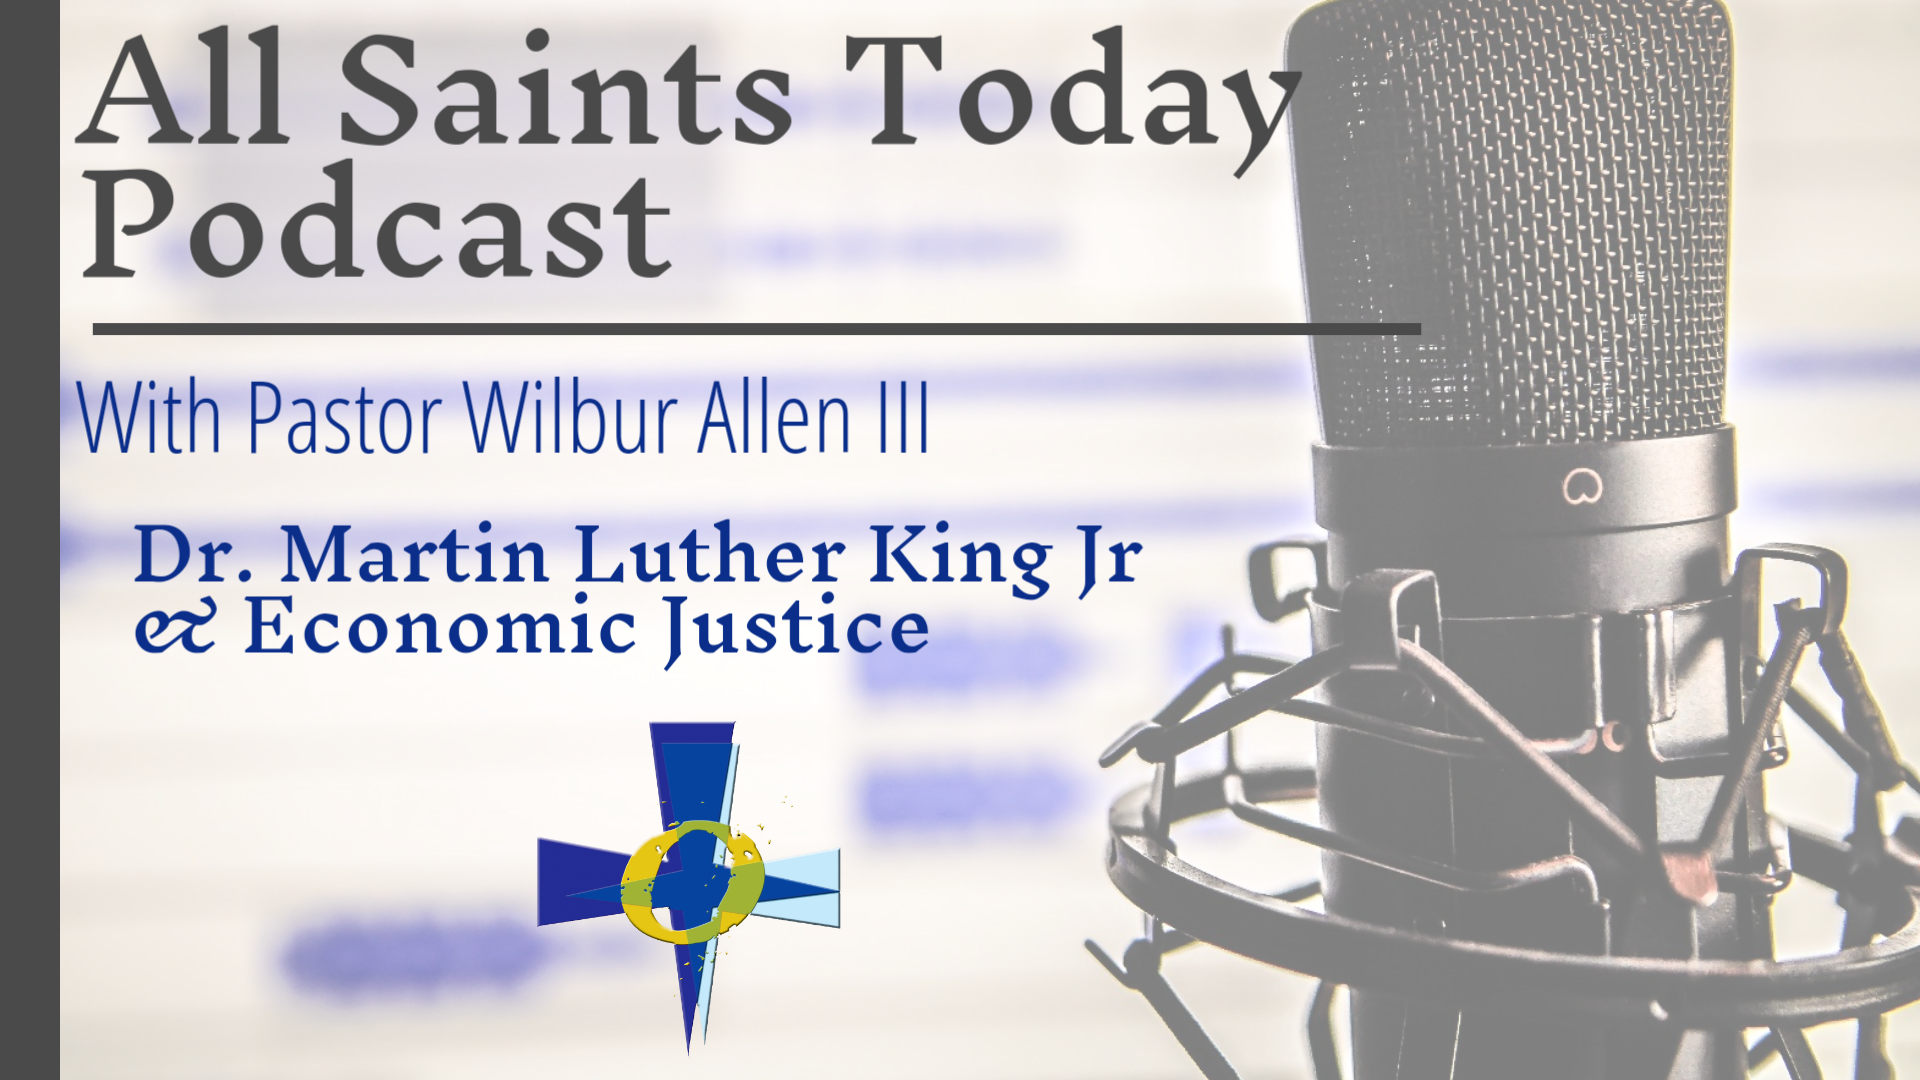 All Saints Today Podcast - Dr. Martin Luther King Jr and Economic Justice